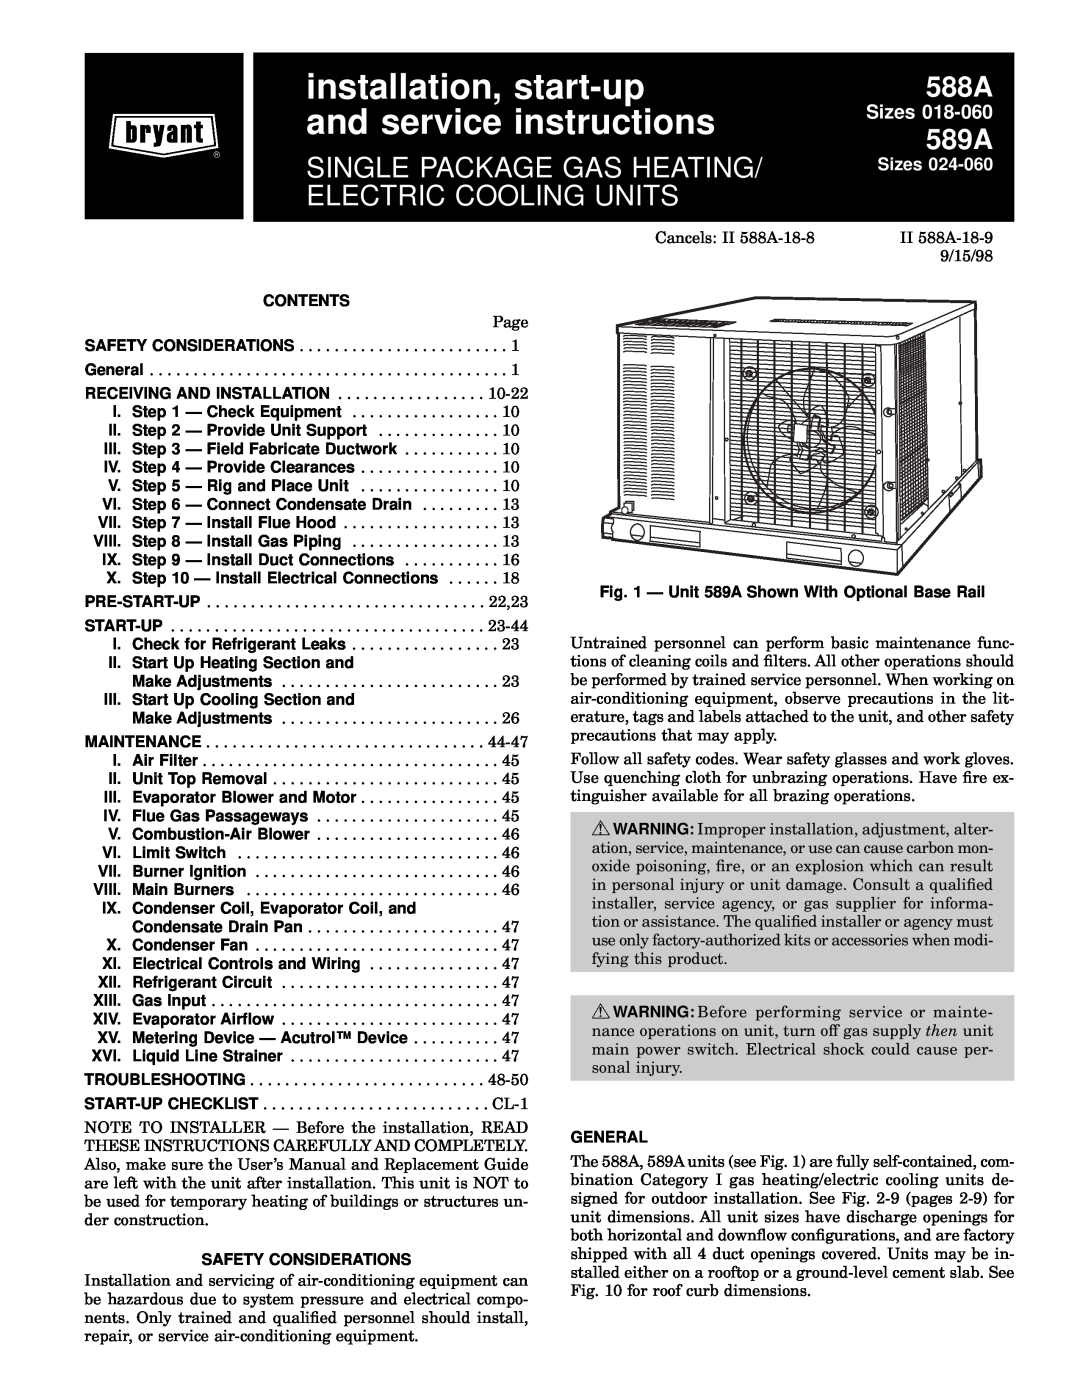 Bryant 589A user manual Contents, II. Start Up Heating Section and, III. Start Up Cooling Section and, General, 588A 